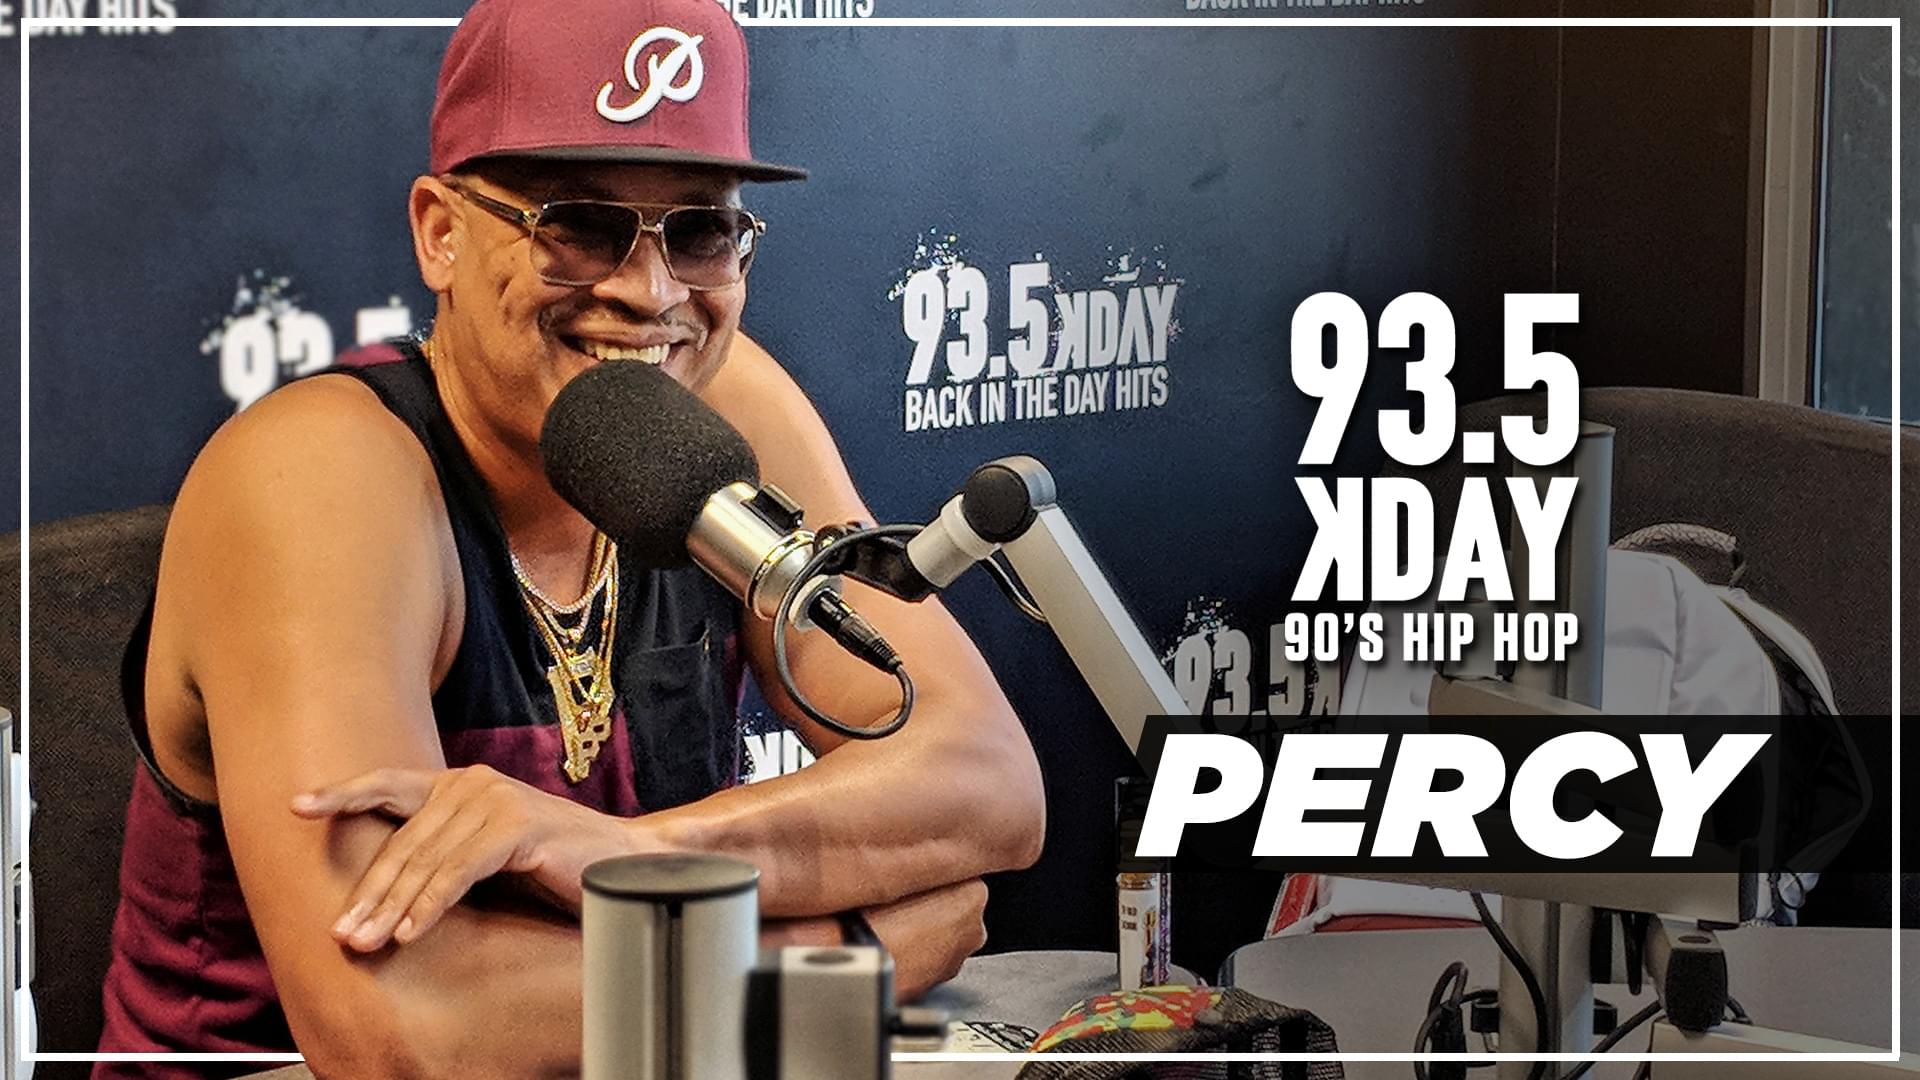 Big Percy Talks Snoop Dogg Smoking In The White House + Album W/Unreleased Nate Dogg Track